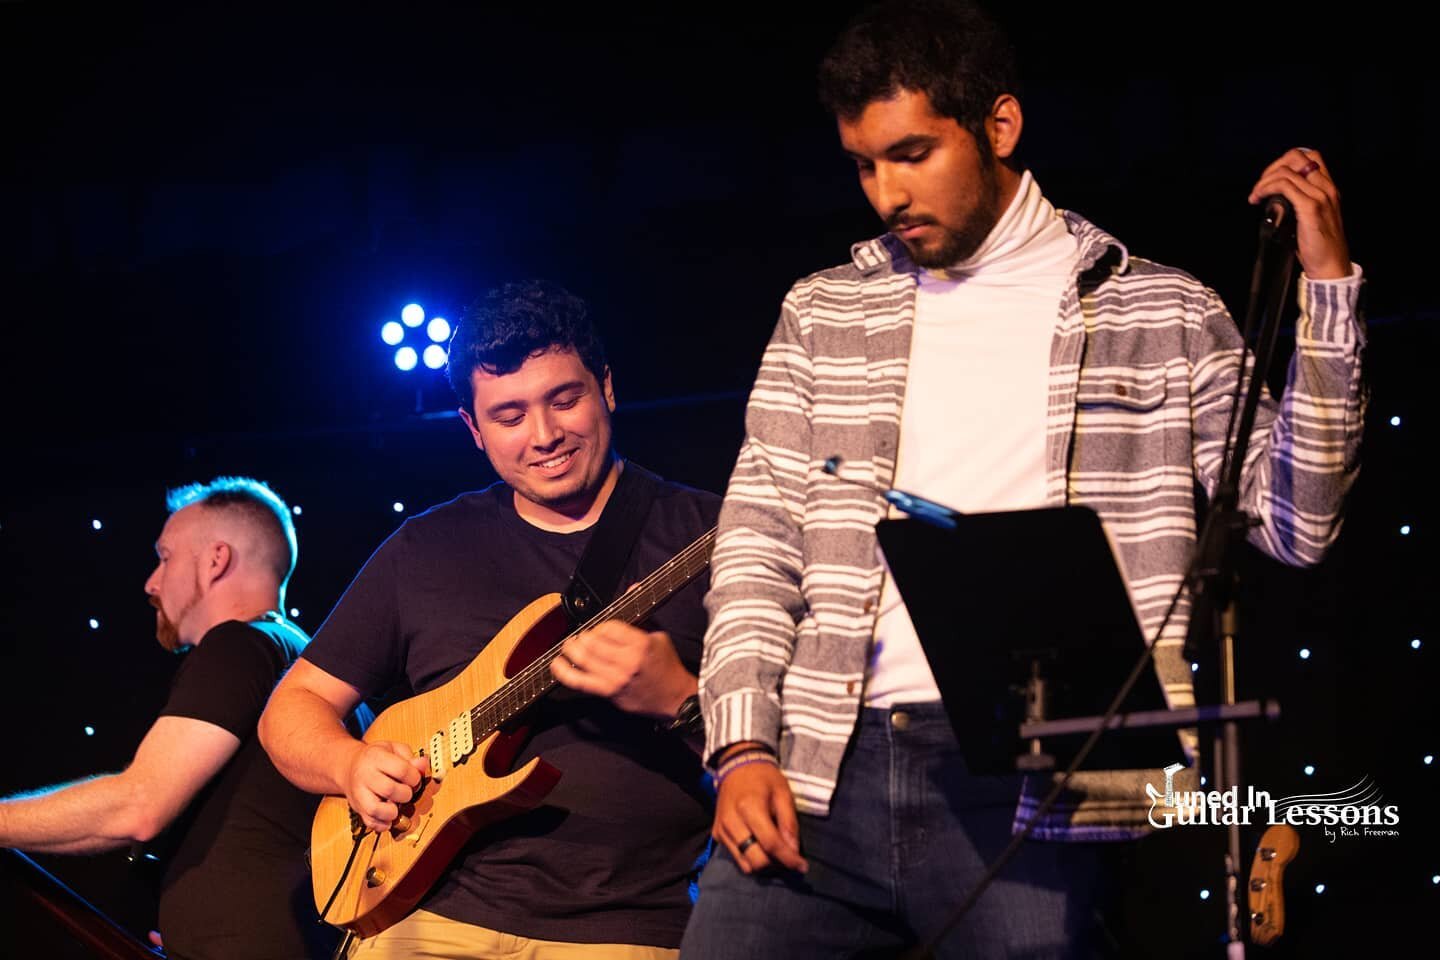 @javi_j_martinez &amp; @dapadilla27 having a blast performing! Javi has come an incredibly long way on his journey in learning guitar. I'm so proud to see where he's at with just over 2 years of playing under his belt. 
Some people think learning gui